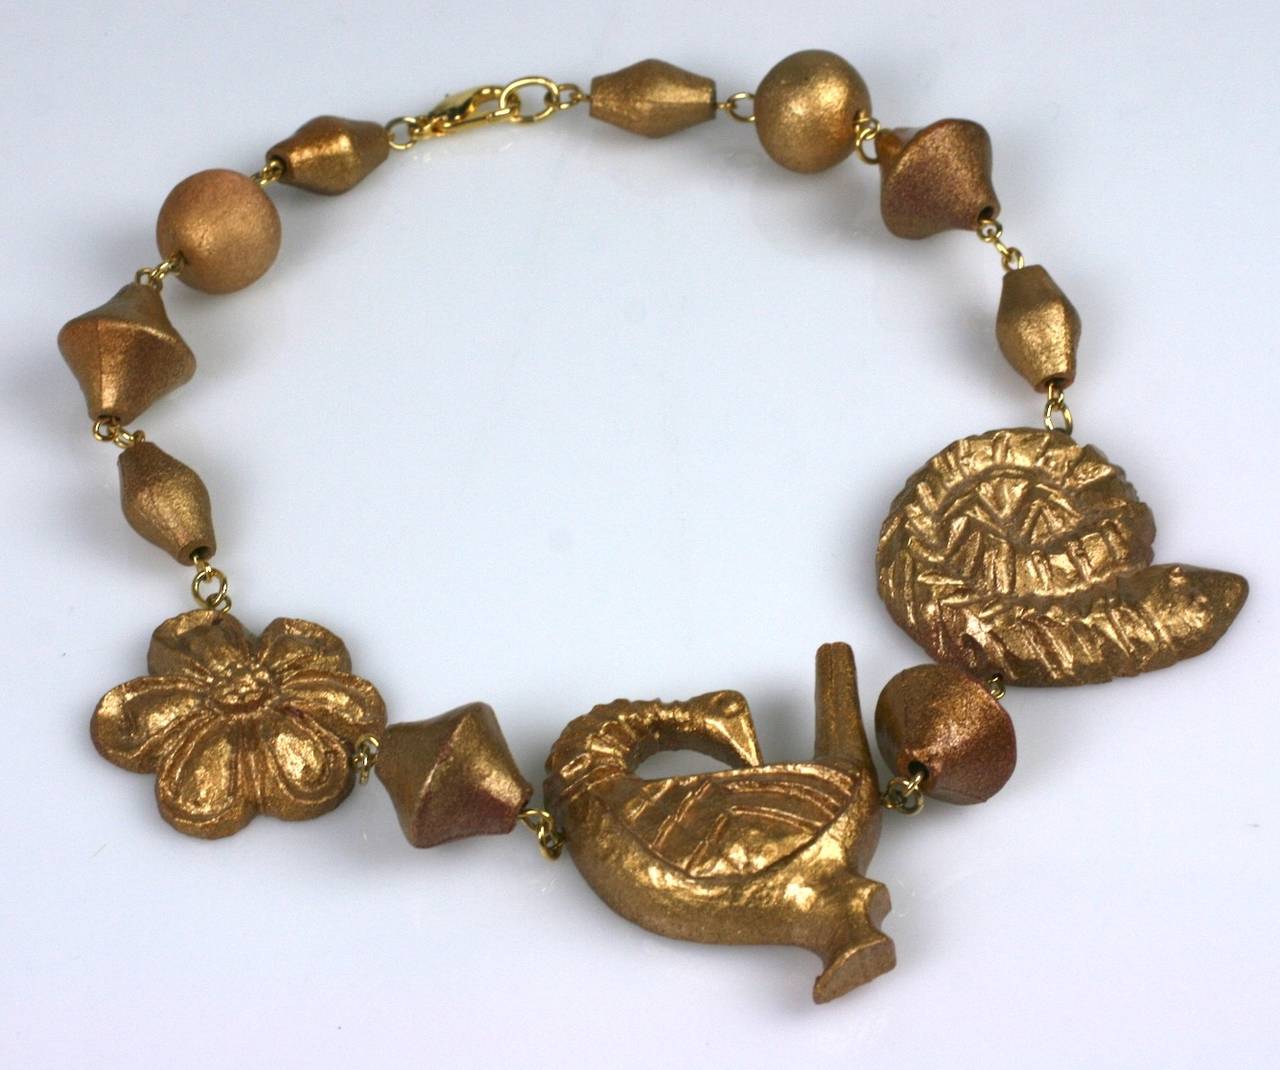 Kenzo carved and gilt wood composition figural necklace. Composed of a backward glancing goose, coiled serpent, and classical floral rosette and strung with lantern and round gilt beads. Excellent condition.
Length 17